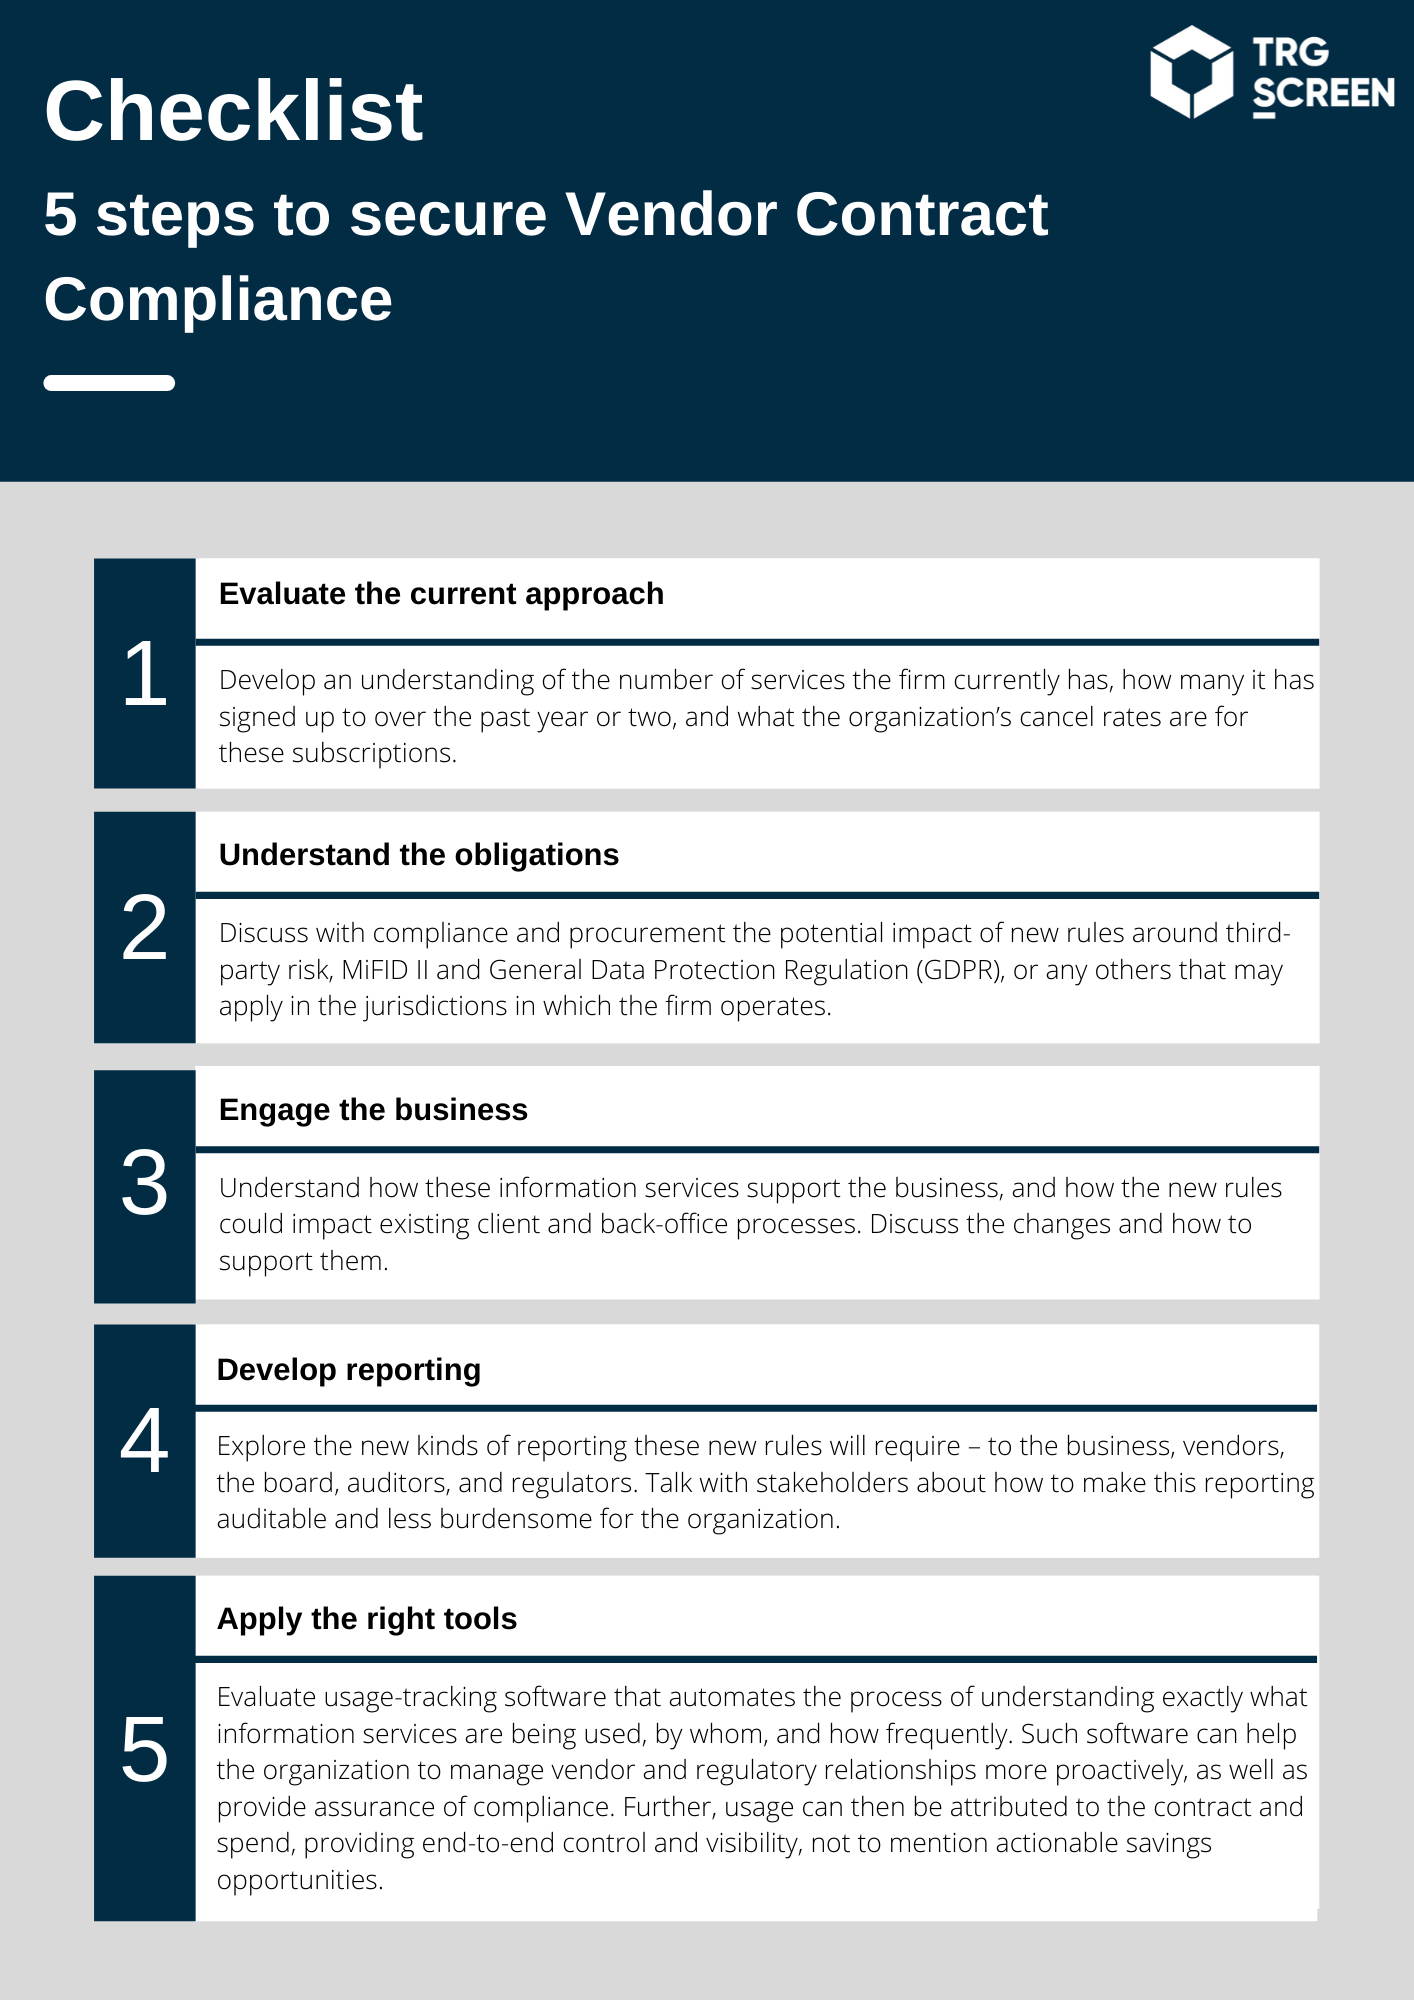 5 steps to secure Vendor Contract Compliance